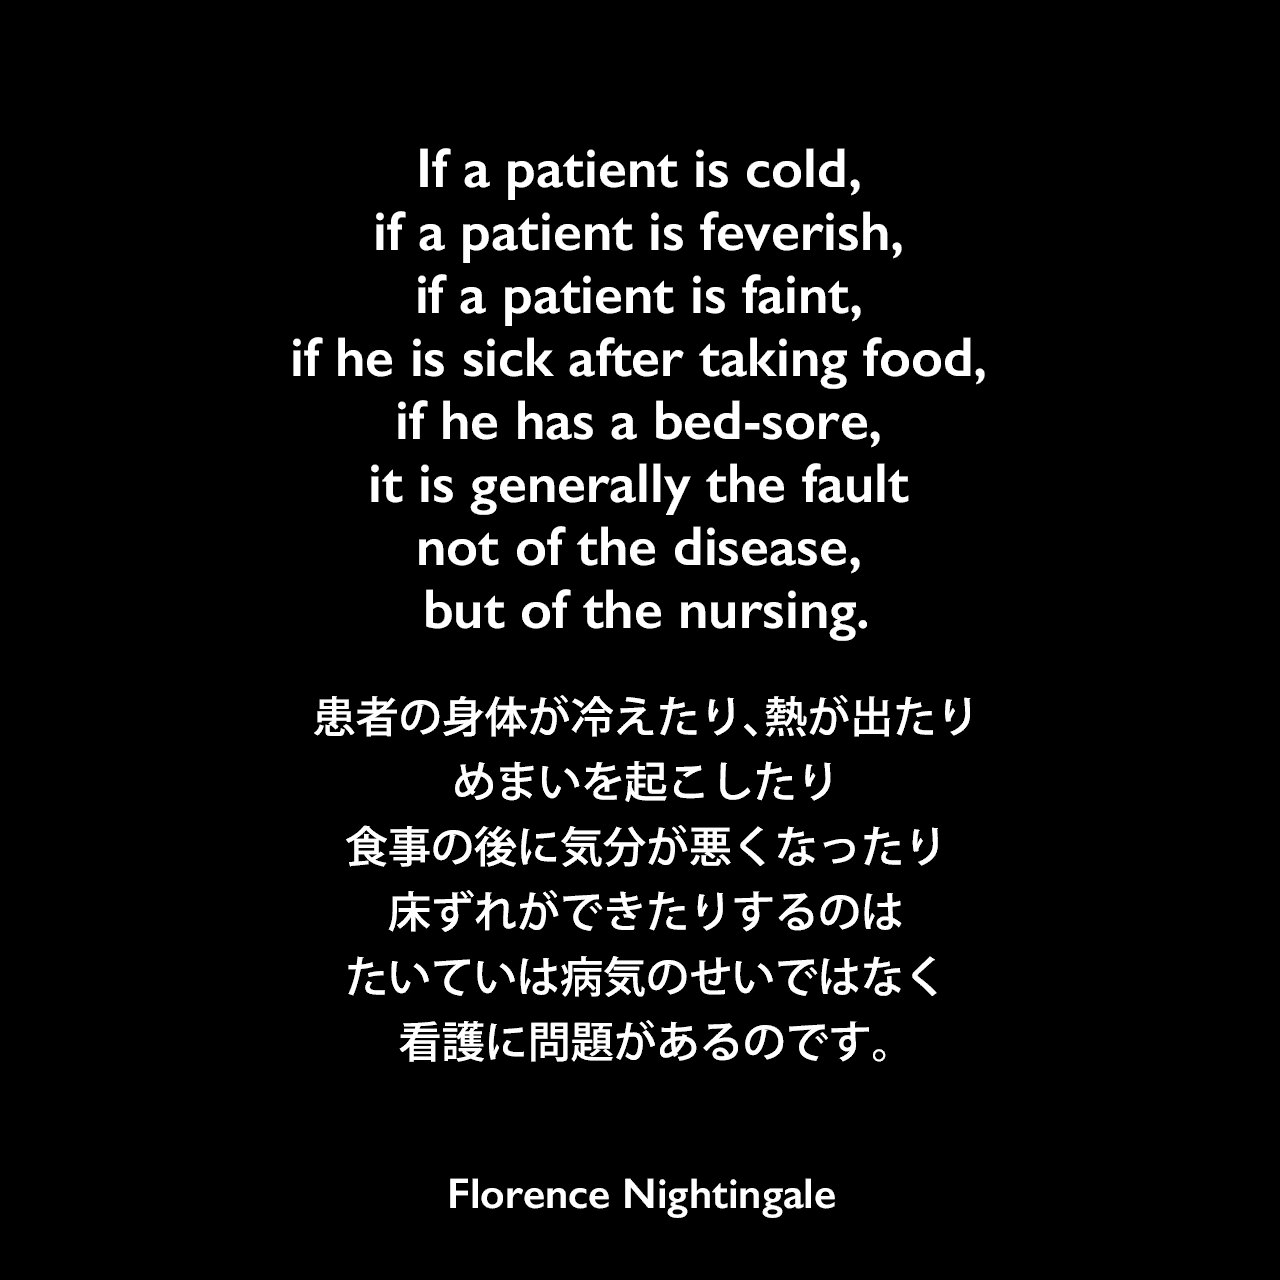 If a patient is cold, if a patient is feverish, if a patient is faint, if he is sick after taking food, if he has a bed-sore, it is generally the fault not of the disease, but of the nursing.患者の身体が冷えたり、熱が出たり、めまいを起こしたり、食事の後に気分が悪くなったり、床ずれができたりするのは、たいていは病気のせいではなく、看護に問題があるのです。Florence Nightingale